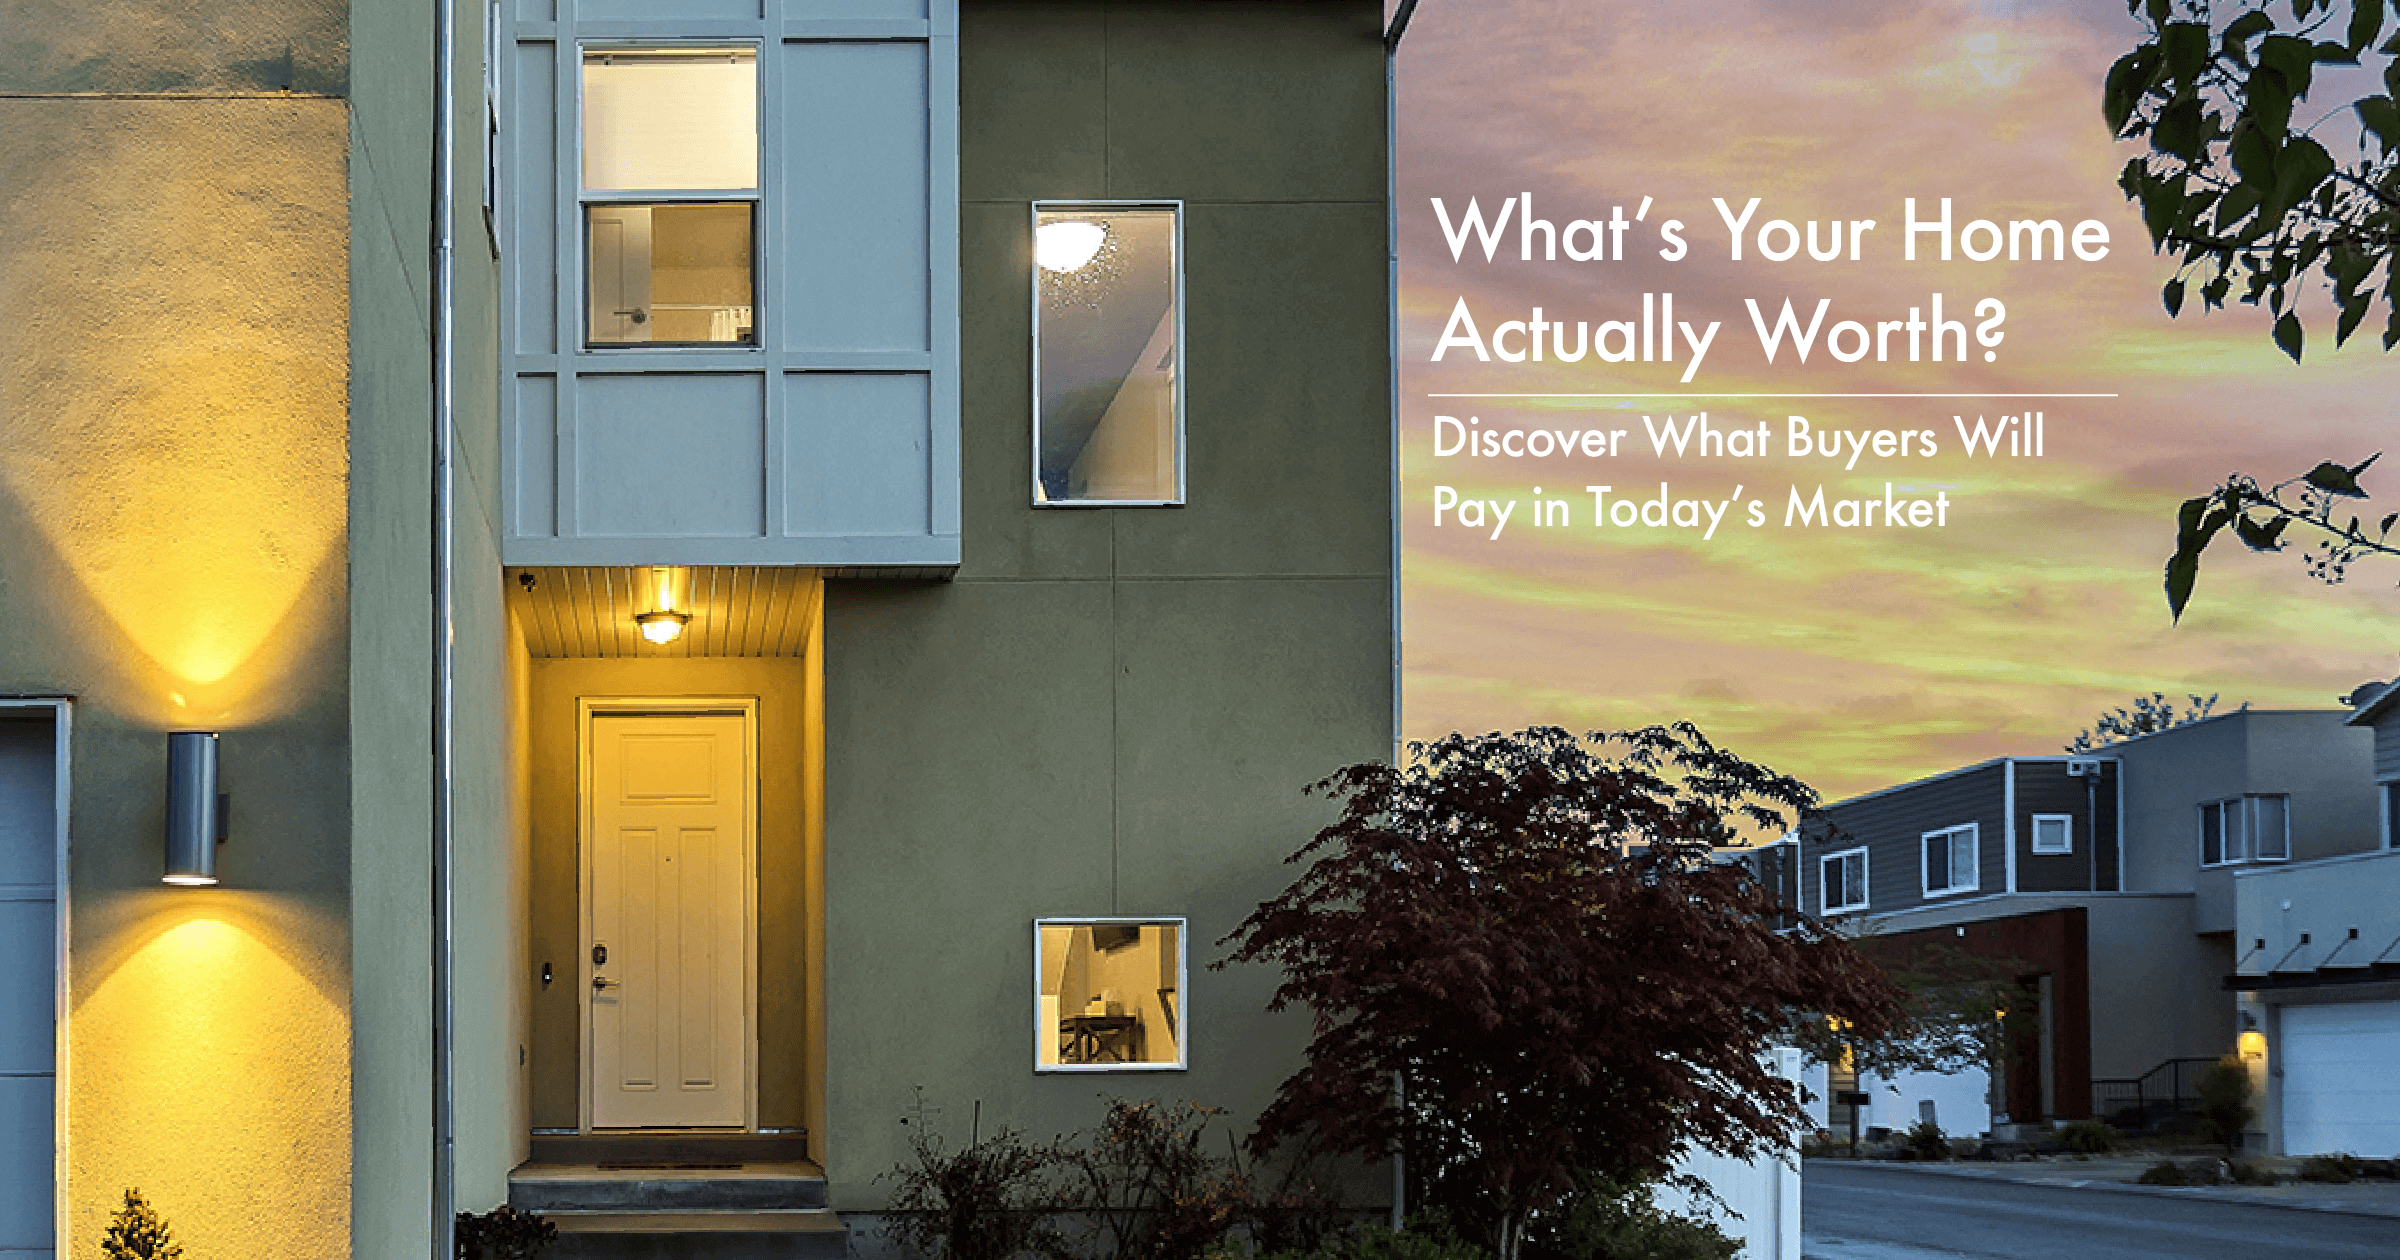 What’s Your Home Actually Worth?  Discover What Buyers Will Pay in Today’s Market